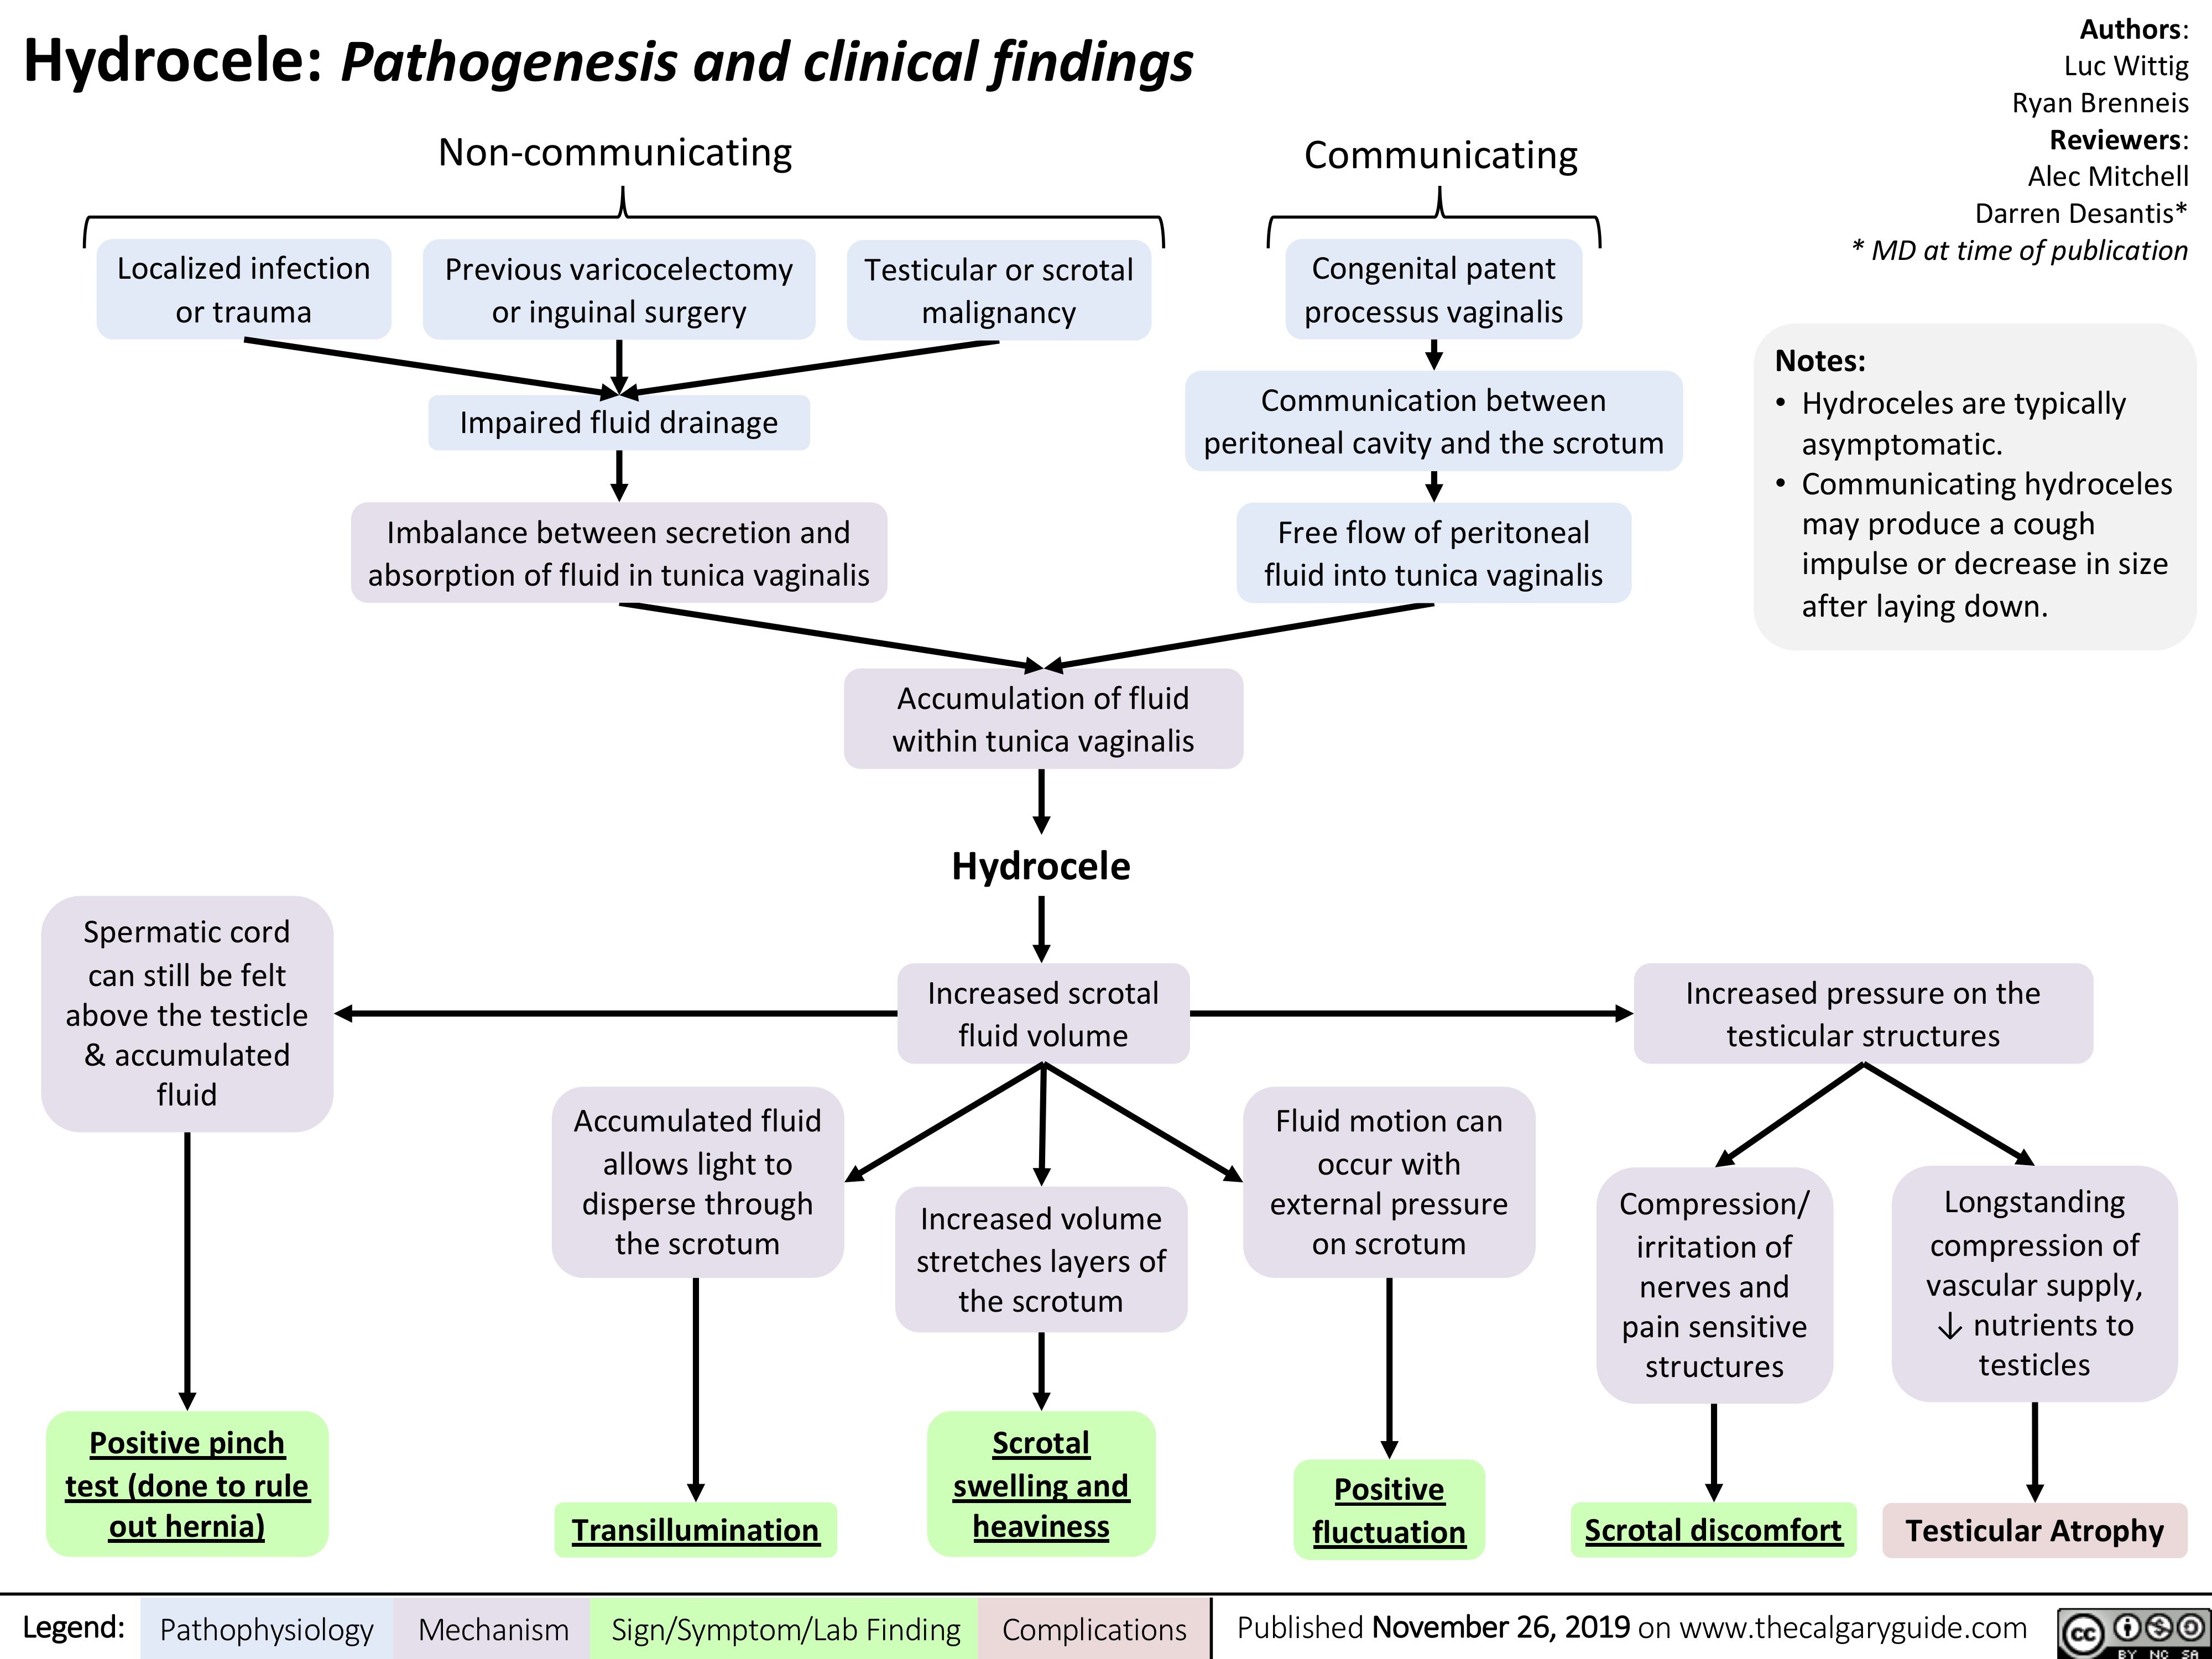 Hydrocele: Pathogenesis and clinical findings Non-communicating
Communicating
Congenital patent processus vaginalis
Communication between peritoneal cavity and the scrotum
Free flow of peritoneal fluid into tunica vaginalis
Authors: Luc Wittig Ryan Brenneis Reviewers: Alec Mitchell Darren Desantis* * MD at time of publication
Notes:
• Hydroceles are typically asymptomatic.
• Communicating hydroceles may produce a cough impulse or decrease in size after laying down.
      Localized infection or trauma
Previous varicocelectomy or inguinal surgery
Impaired fluid drainage
Imbalance between secretion and absorption of fluid in tunica vaginalis
Testicular or scrotal malignancy
               Spermatic cord can still be felt
above the testicle & accumulated fluid
Accumulation of fluid within tunica vaginalis
Hydrocele
Increased scrotal fluid volume
Increased volume stretches layers of the scrotum
Scrotal swelling and heaviness
Increased pressure on the testicular structures
           Accumulated fluid allows light to
disperse through the scrotum
Fluid motion can occur with
external pressure on scrotum
Positive fluctuation
Compression/ irritation of nerves and pain sensitive structures
Scrotal discomfort
Longstanding compression of vascular supply, ↓ nutrients to testicles
           Positive pinch test (done to rule out hernia)
Transillumination
Testicular Atrophy
         Legend:
 Pathophysiology
 Mechanism
Sign/Symptom/Lab Finding
  Complications
Published November 26, 2019 on www.thecalgaryguide.com
   